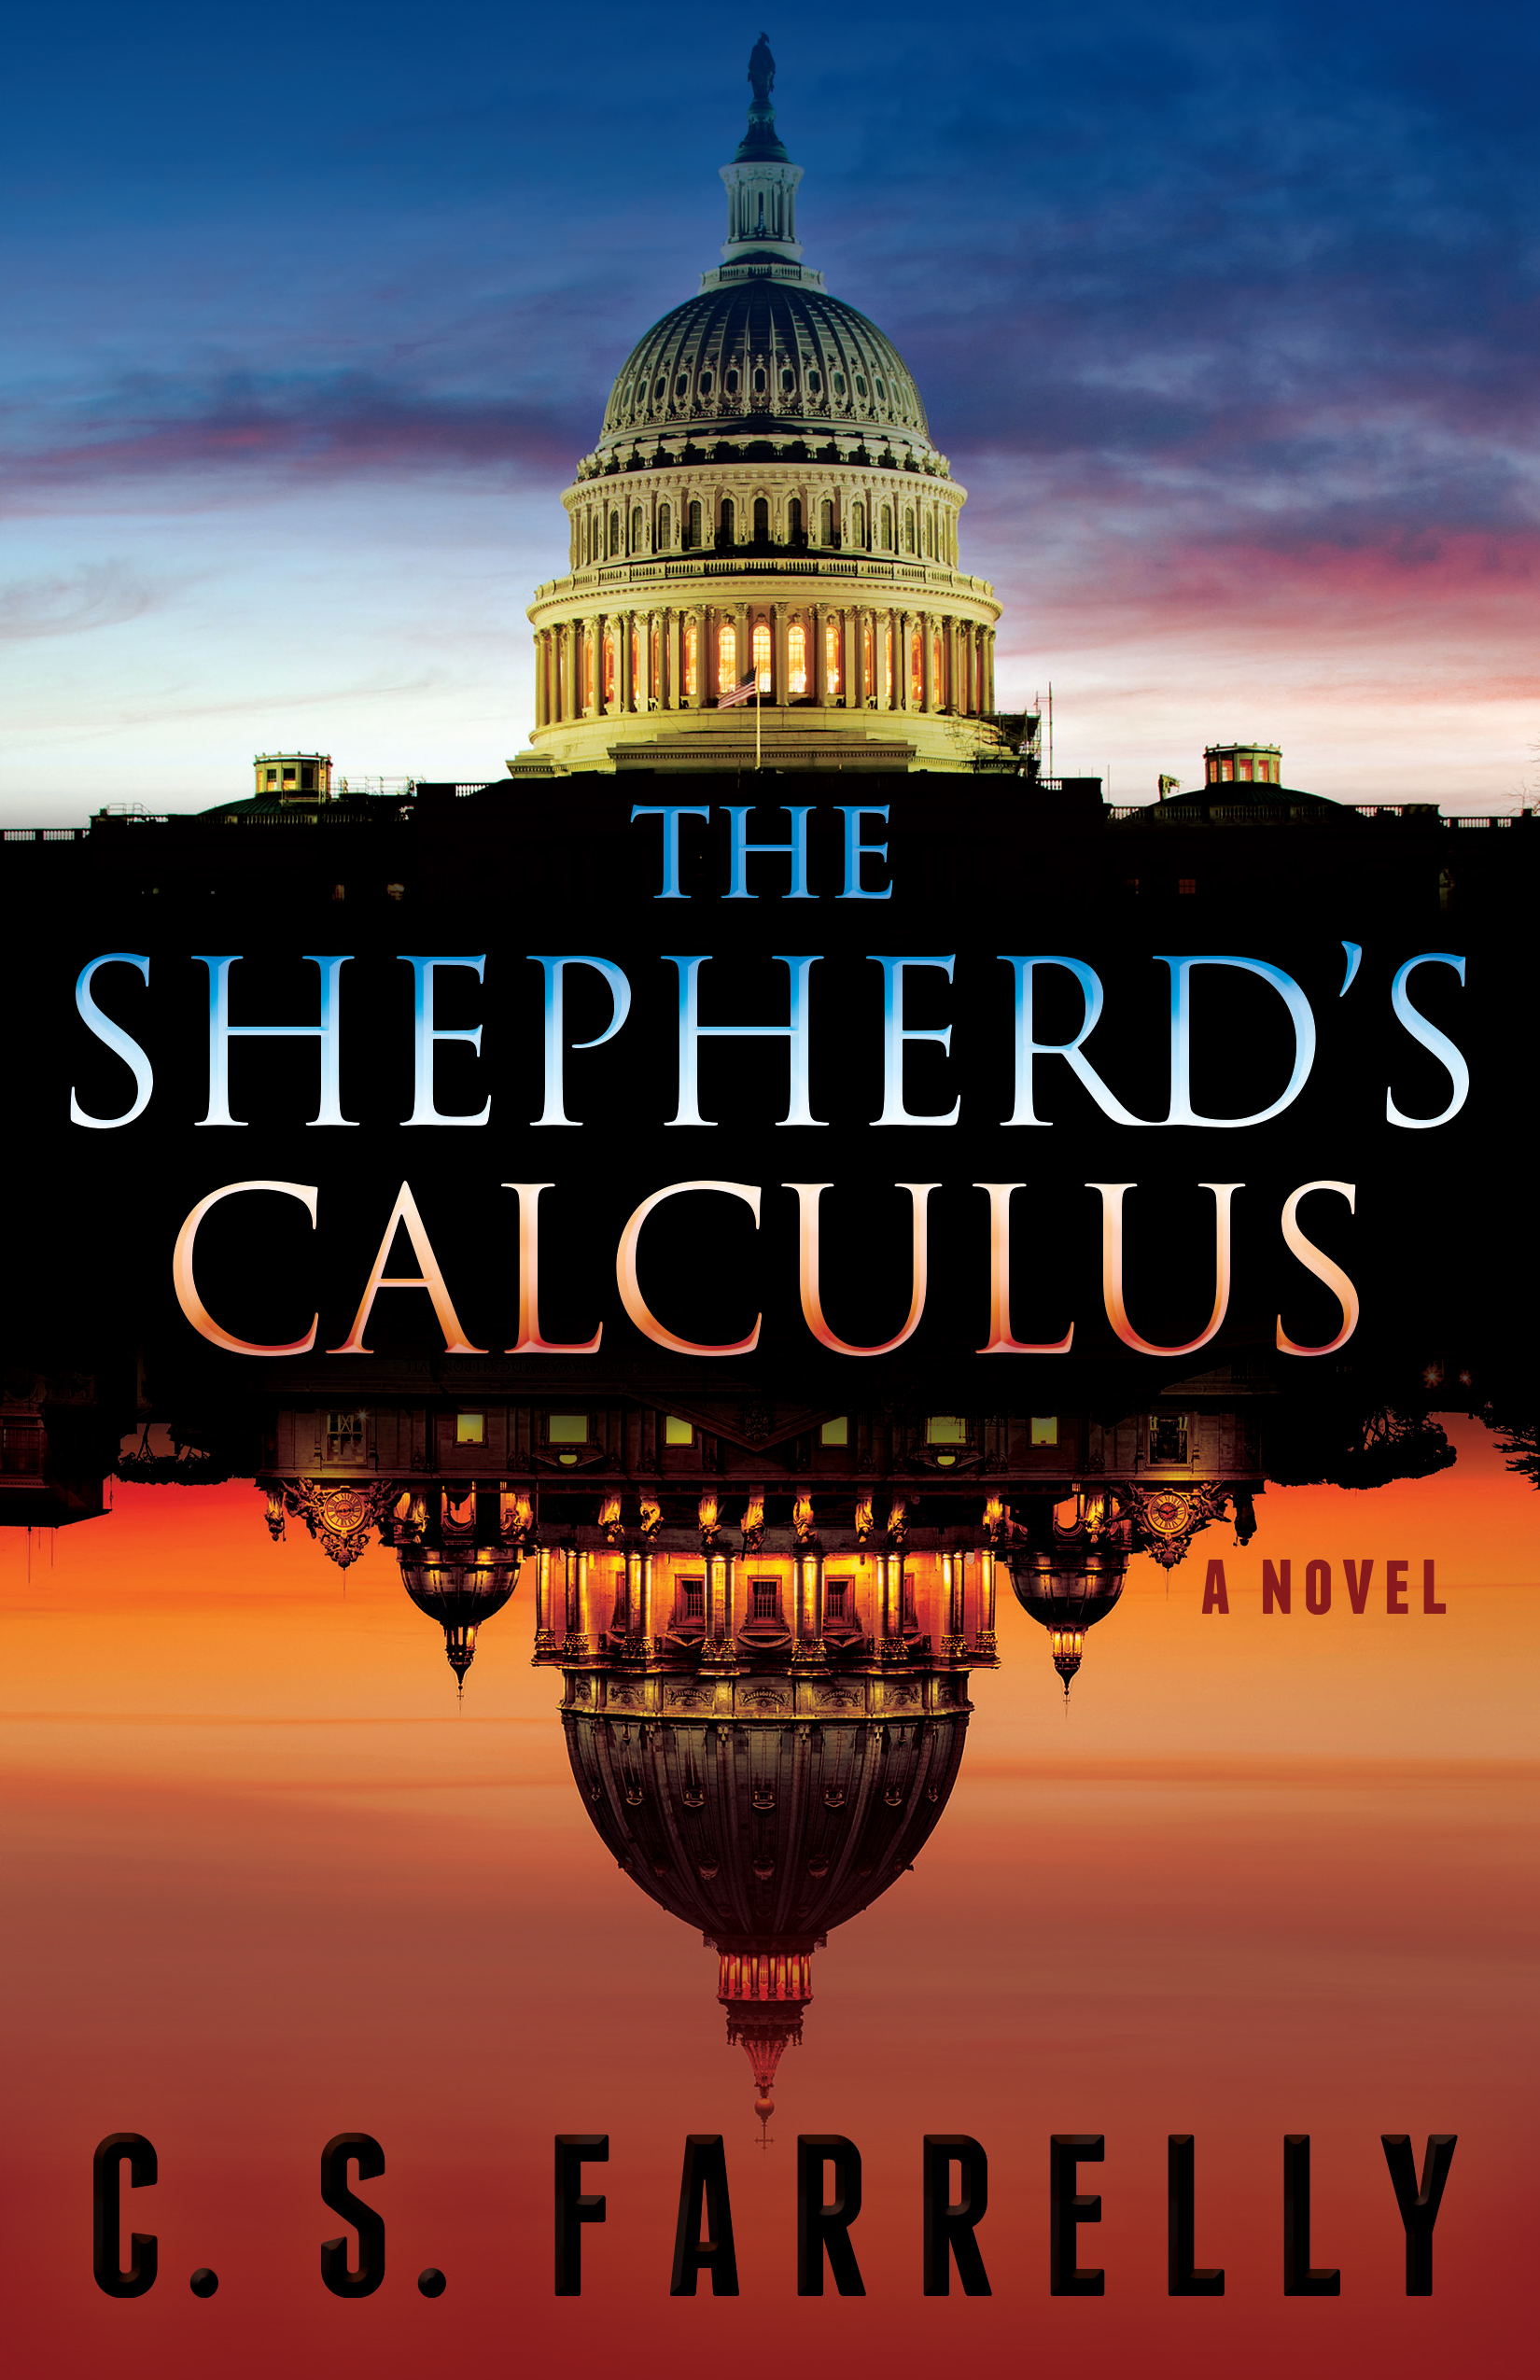 The Shepherd's Calculus by C.S. Farrelly